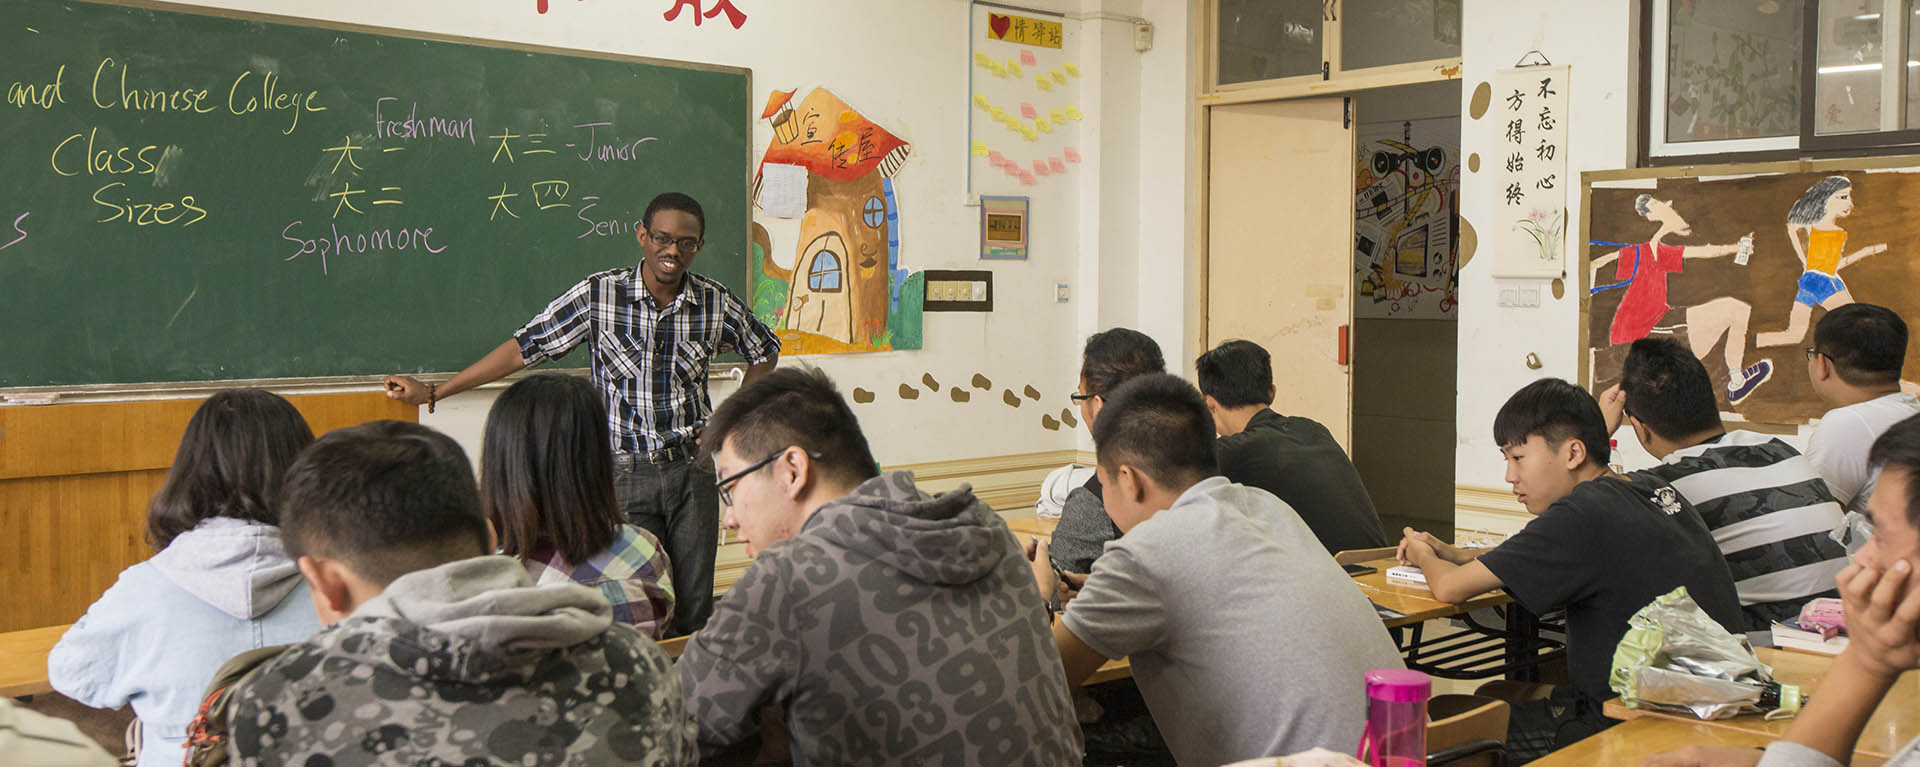 A student gestures towards the chalkboard while teaching a group of students in a Chinese classroom.